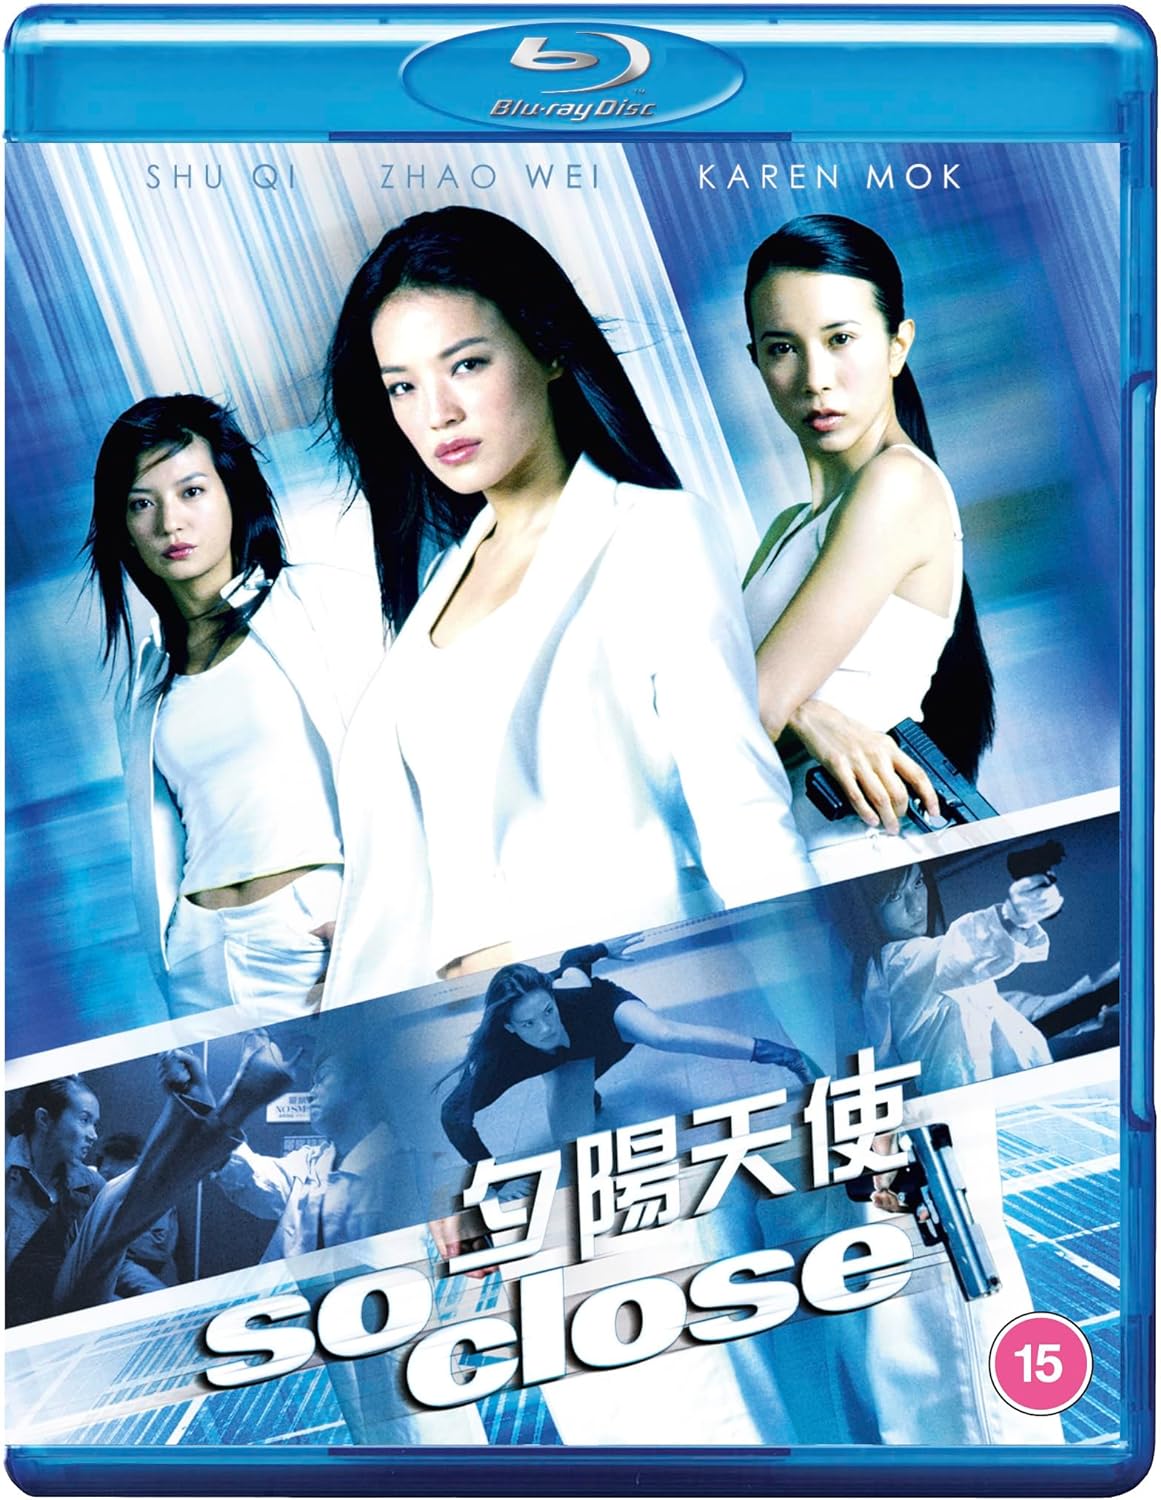 So Close Blu-ray with Slipcover (88 Films/Region B) [Preorder]